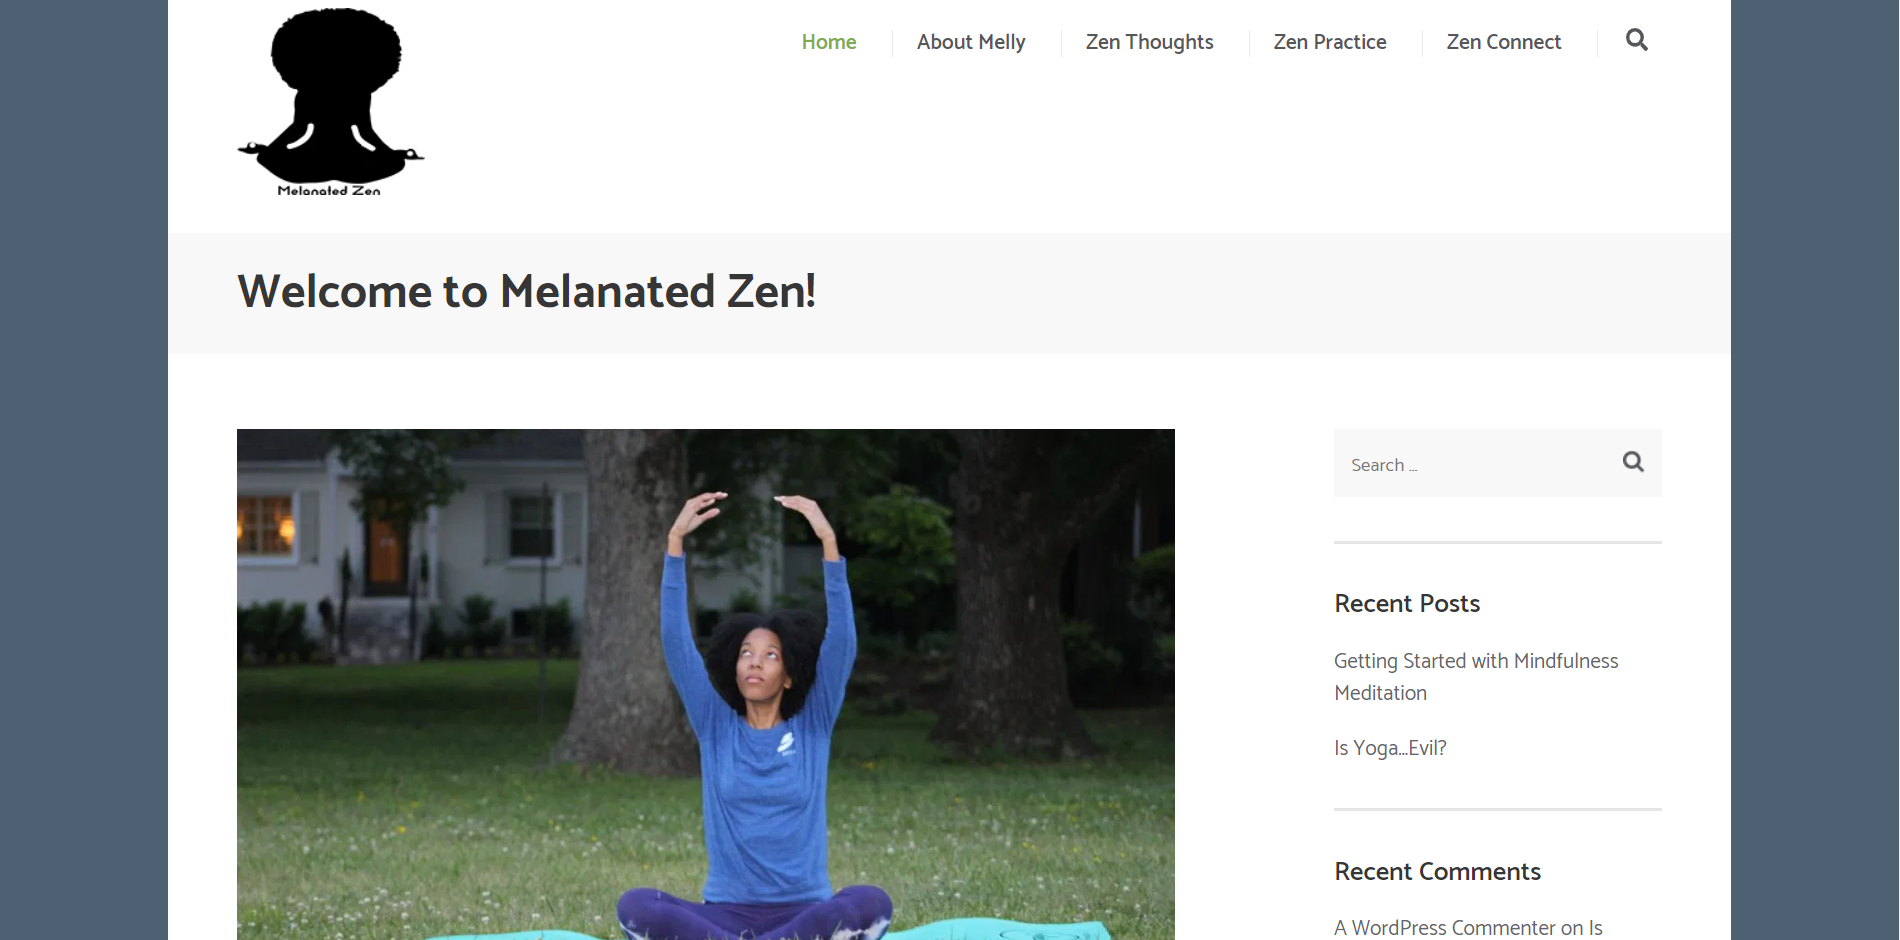 The home page for Melanated Zen. Melissa Dale sits on a yoga mat in her living room.